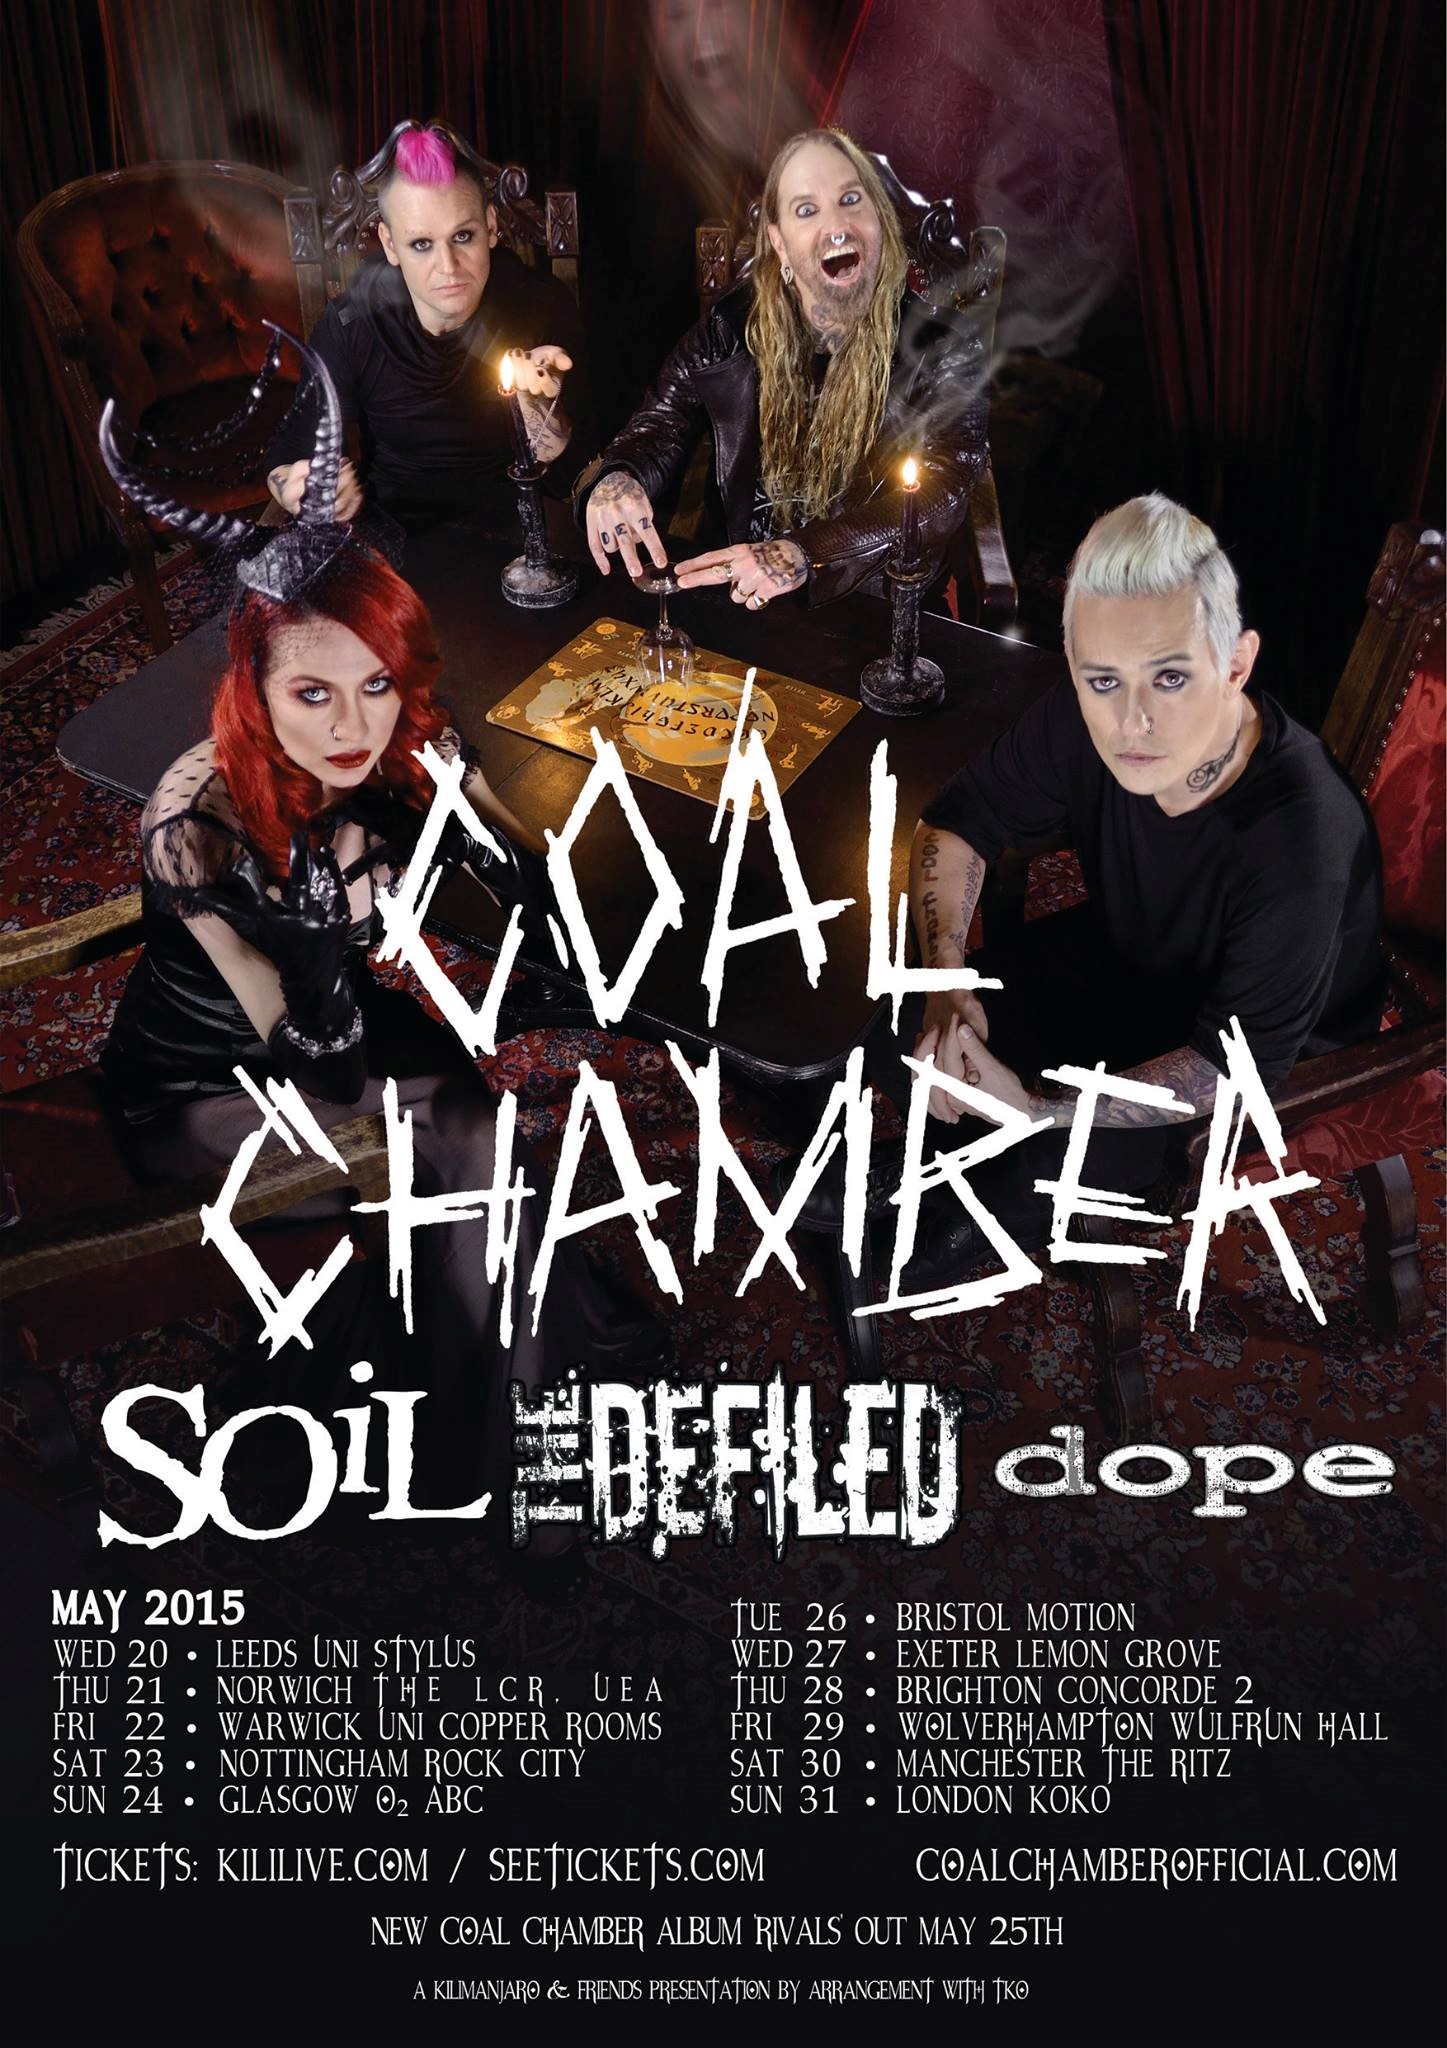 Soil and Coal Chamber on Tour 2015